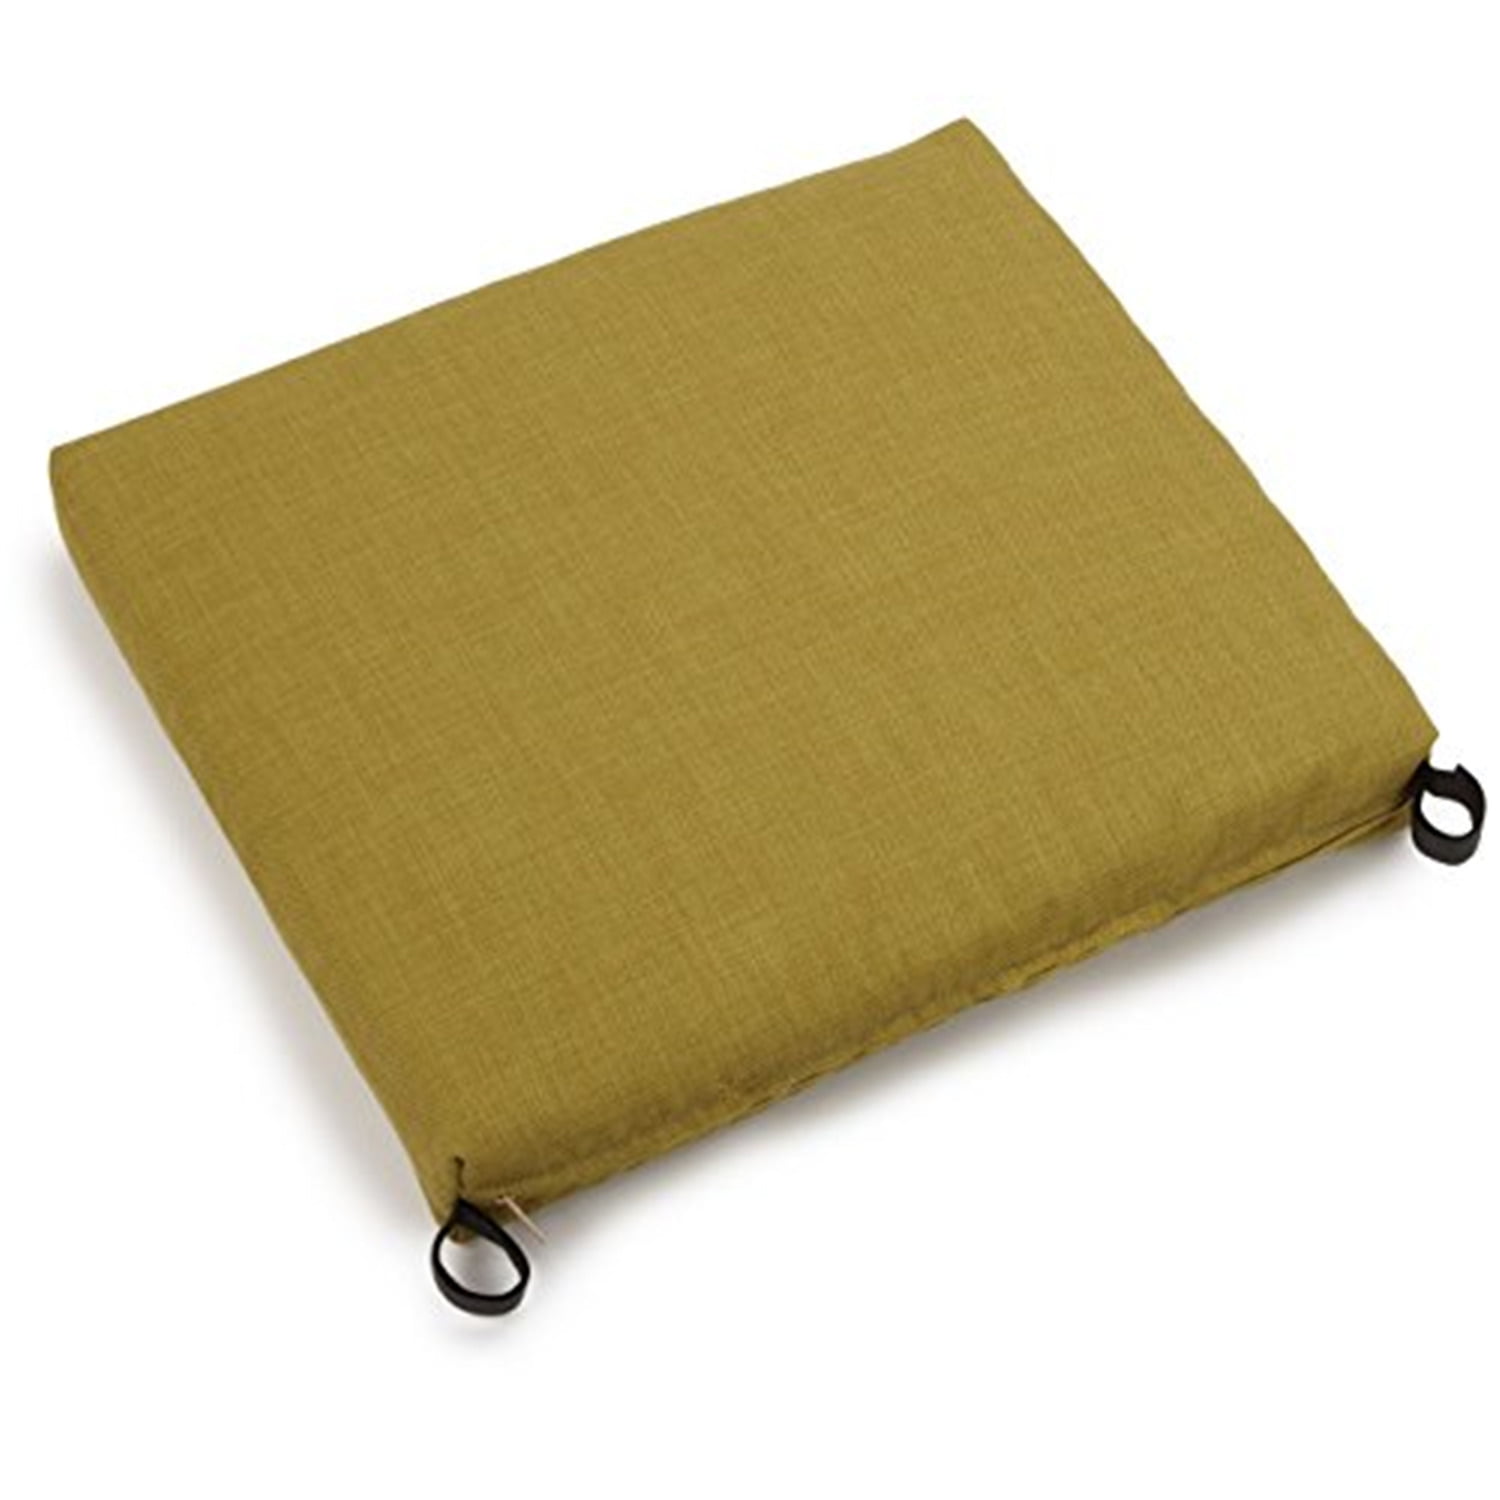 20-inch by 19-inch Spun Polyester Chair Cushion-Color:Avocado - Walmart ...